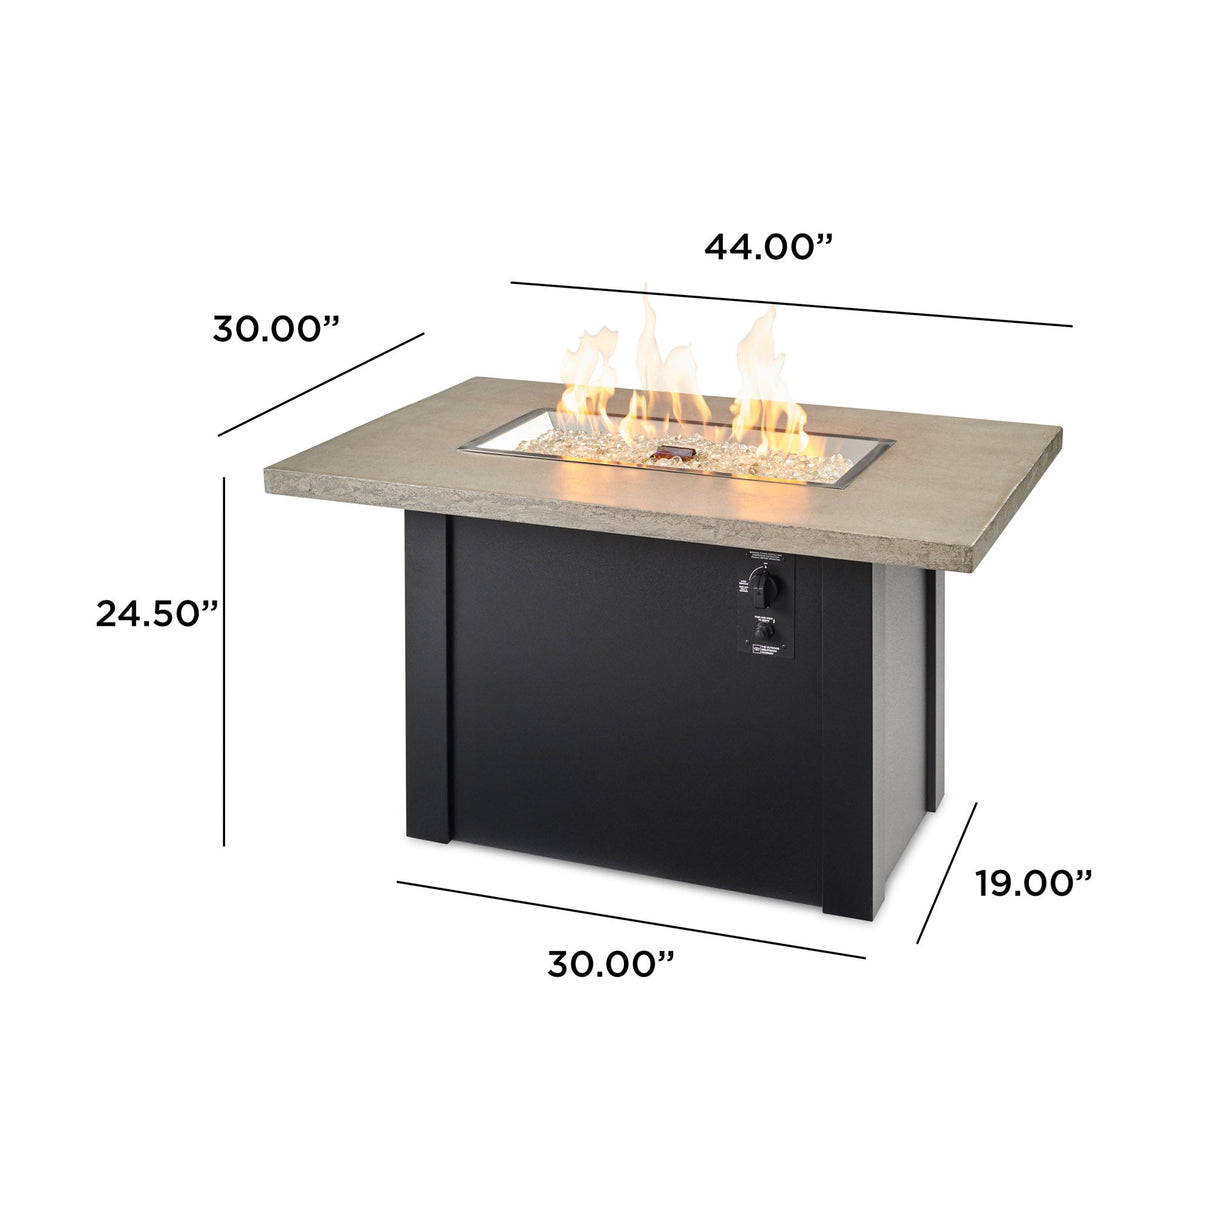 Dimensions overlaid on a Havenwood Rectangular Gas Fire Pit Table with a Pebble Grey top and Luverne Black base